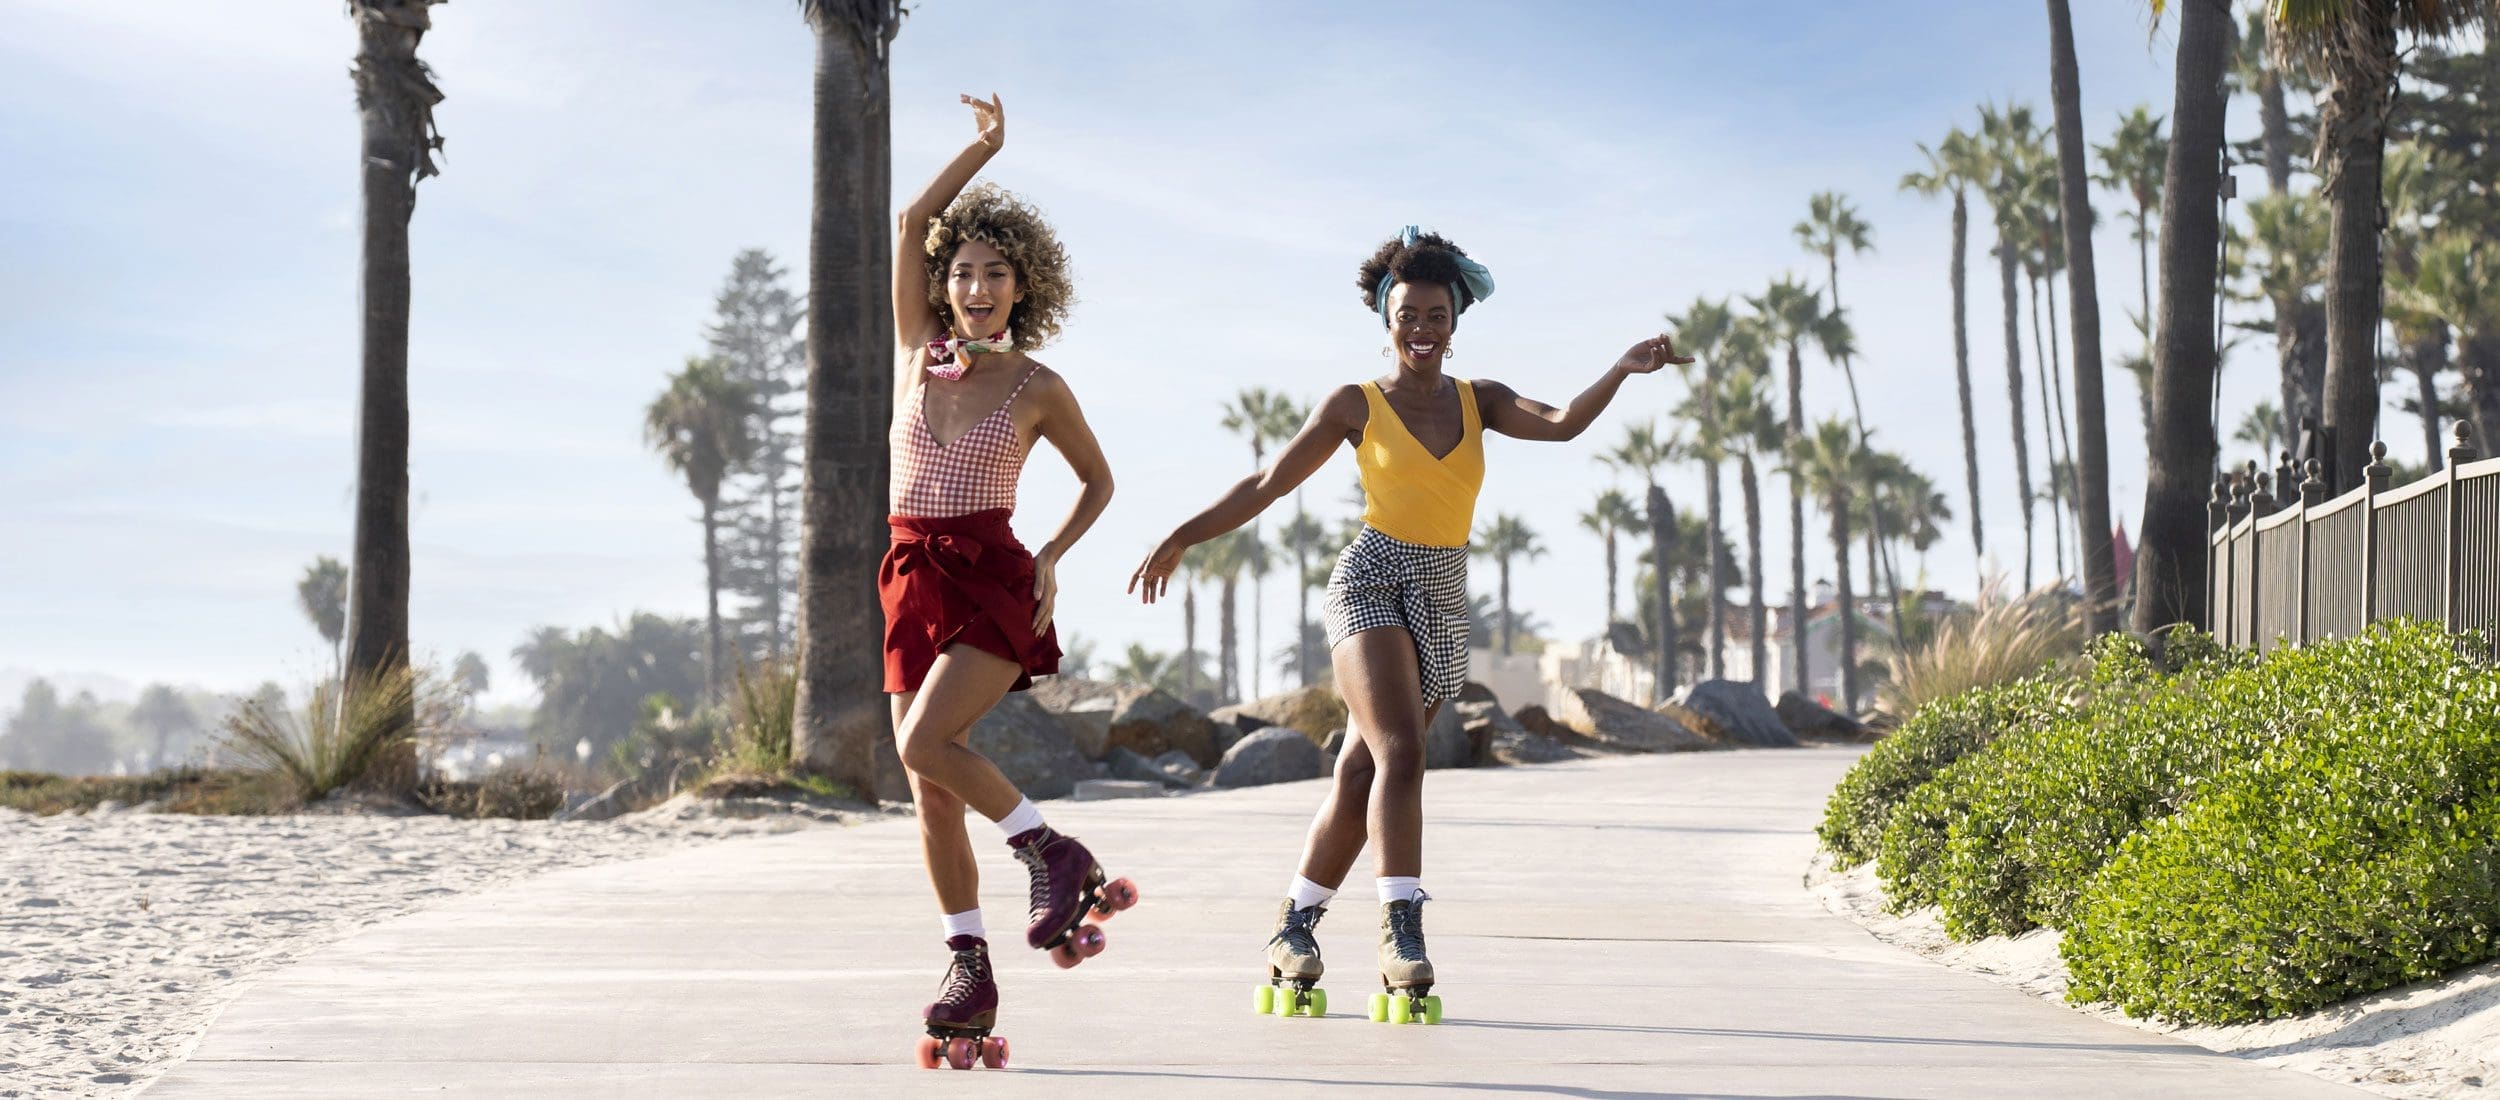 Two women roller skating by the beach